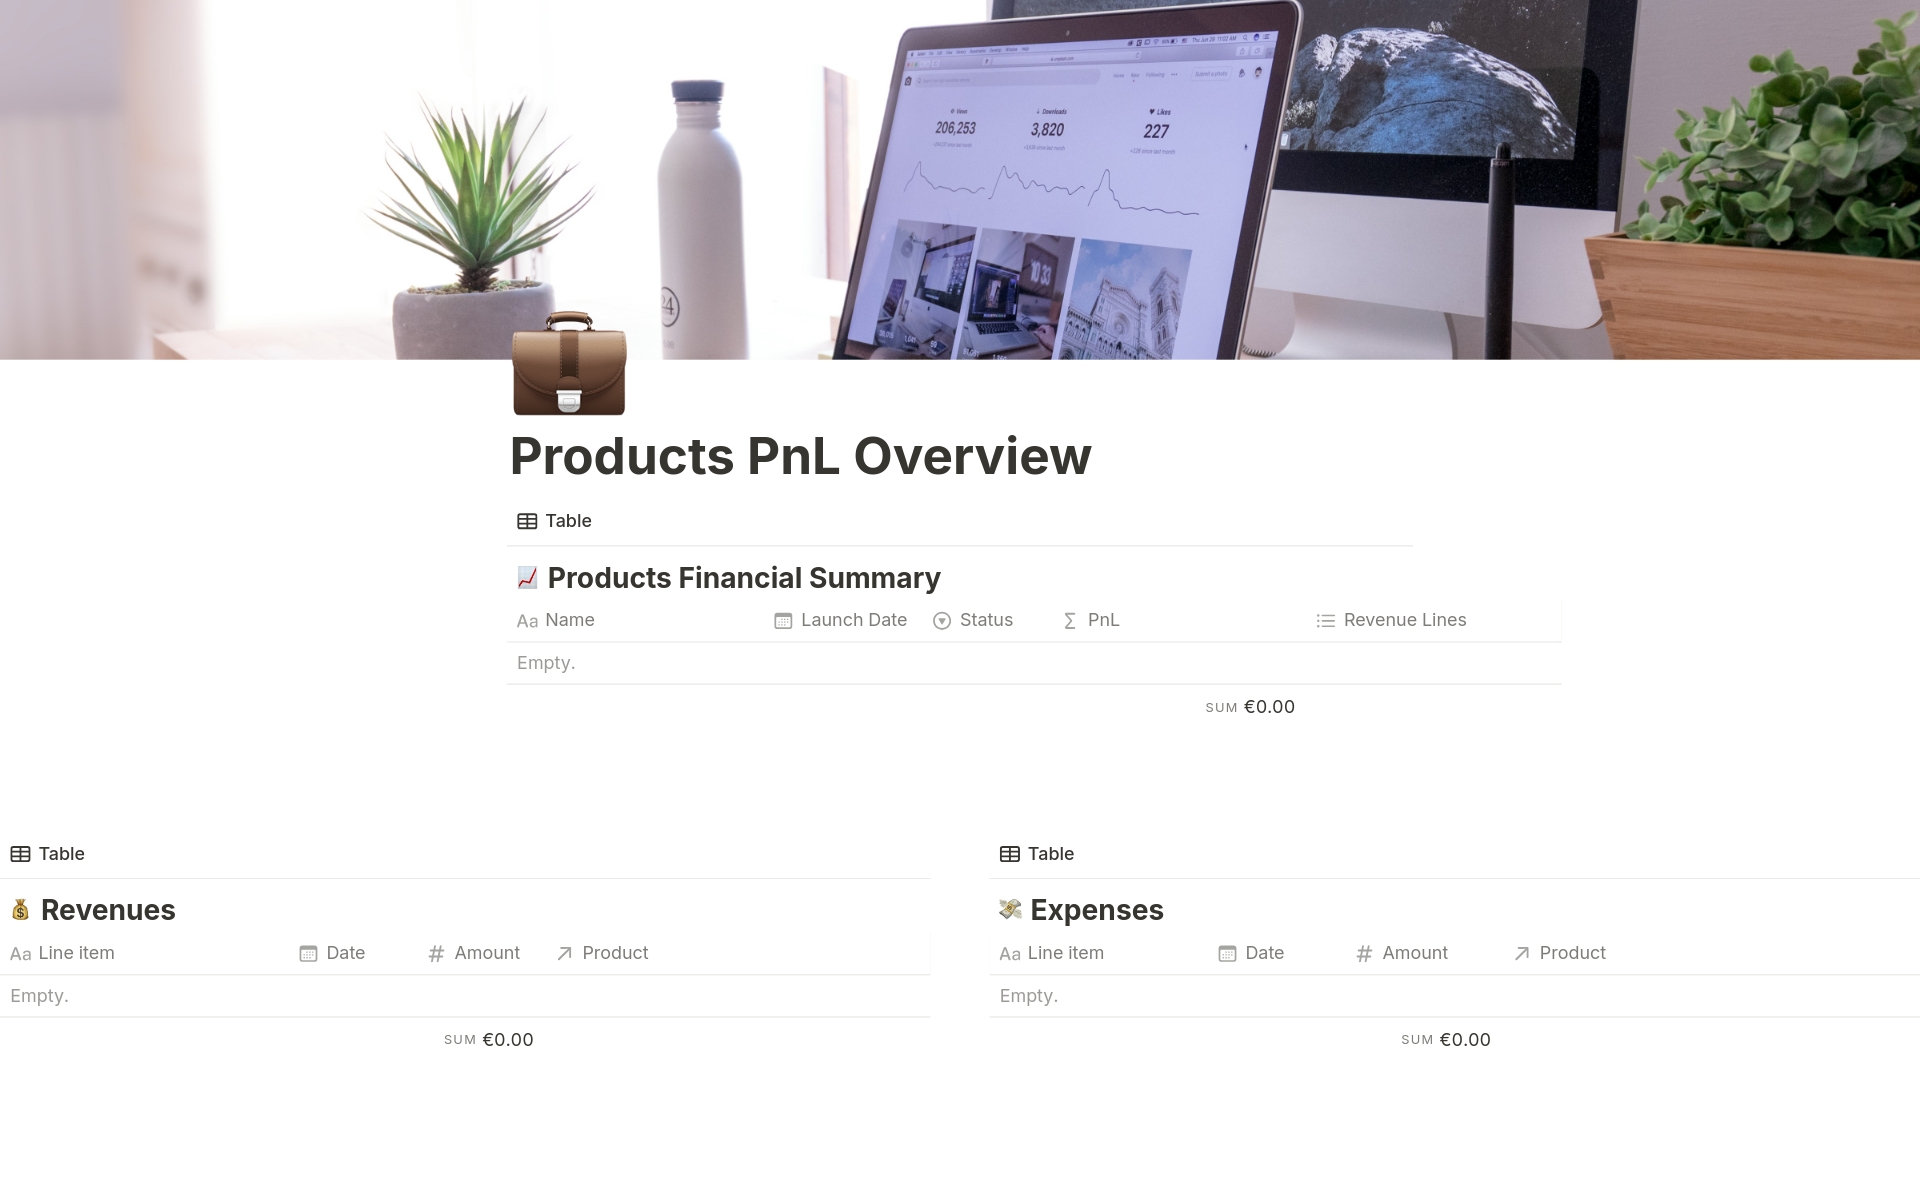 The Entrepreneur's Toolkit is perfect for startups! Track product PnL, manage tasks with a Kanban board, and boost productivity with a Pomodoro widget. Streamline your workflow and boost efficiency!